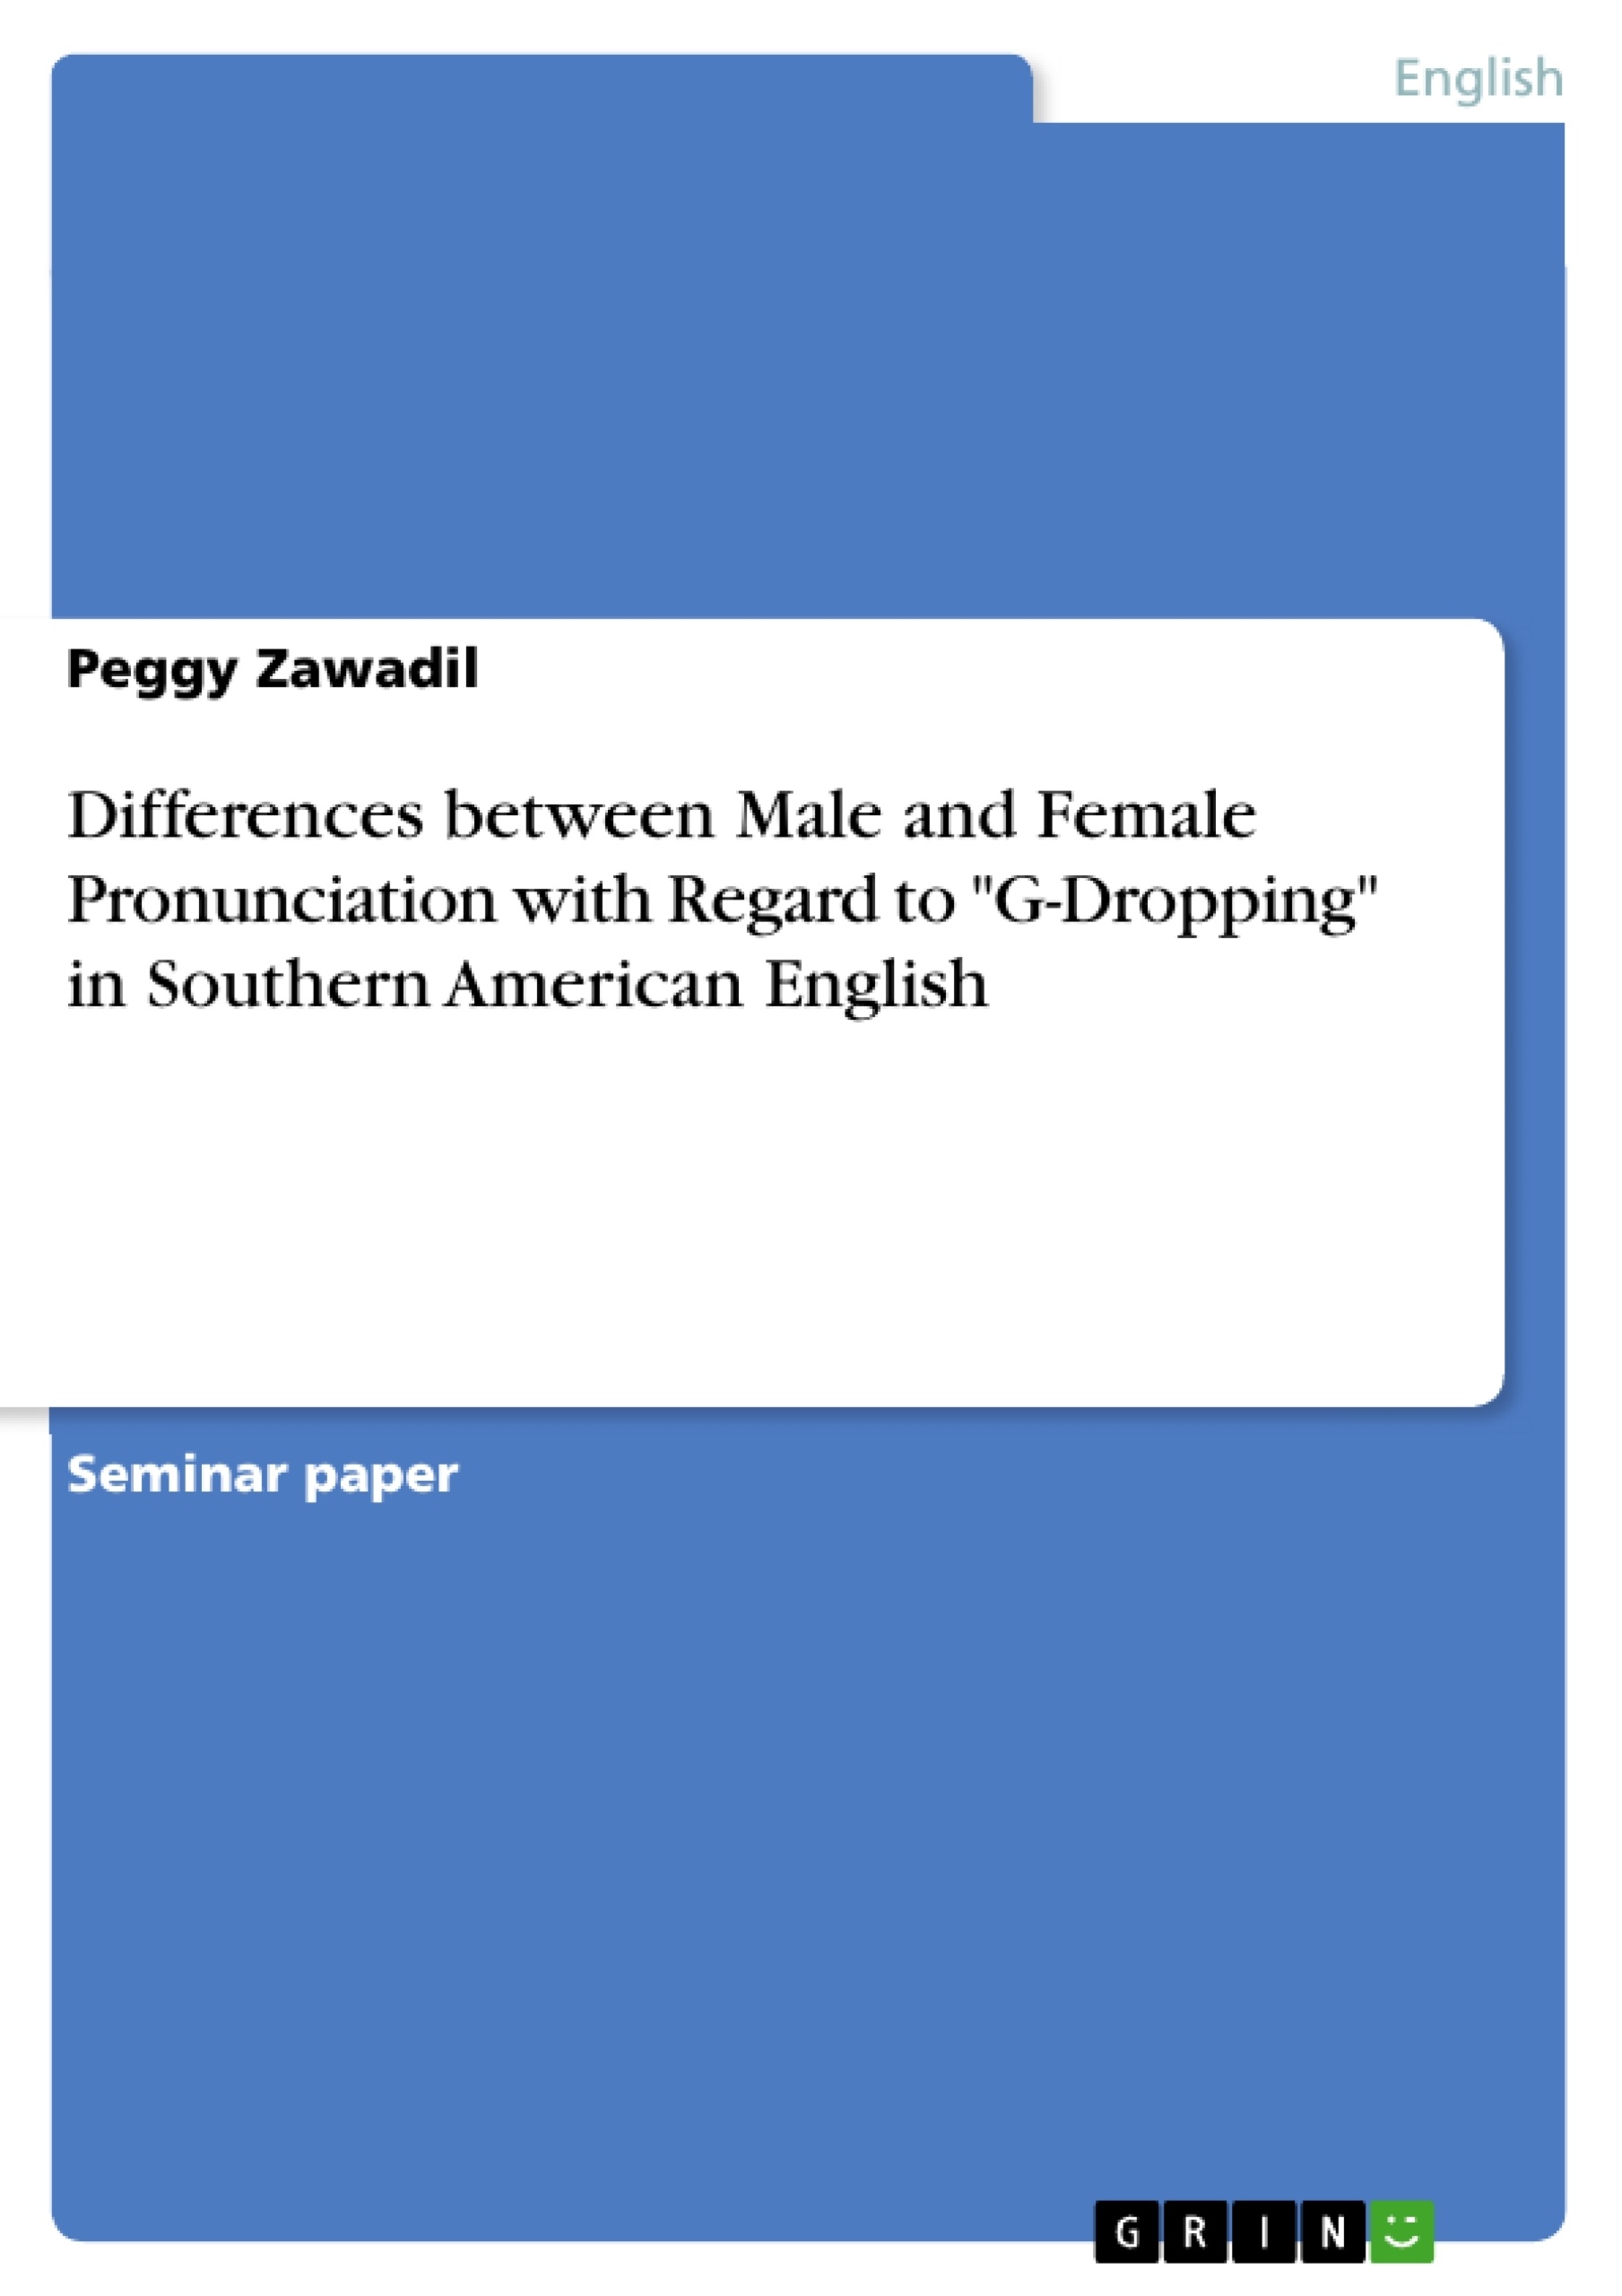 Title: Differences between Male and Female Pronunciation with Regard to "G-Dropping" in Southern American English